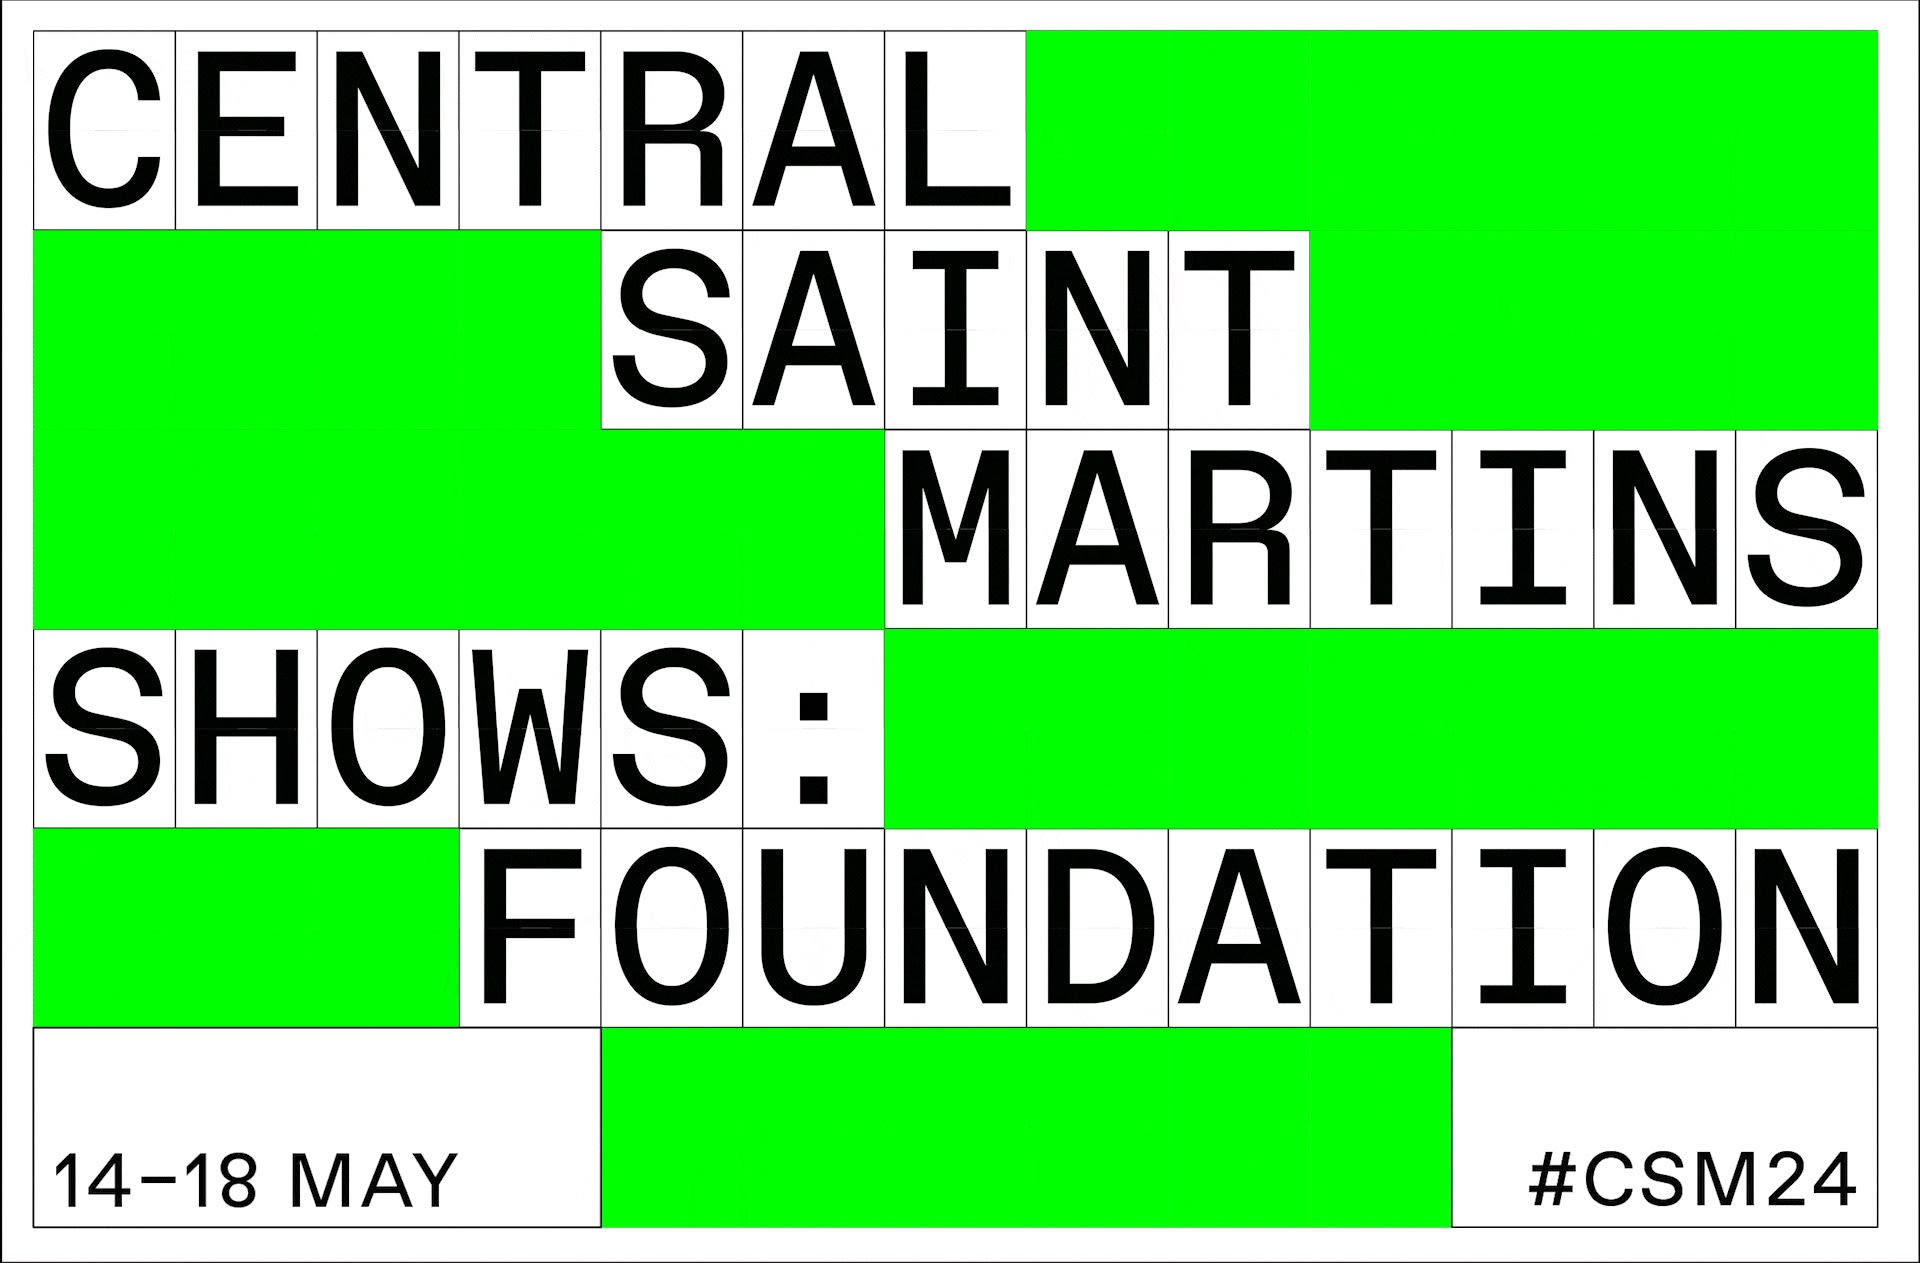 CENTRAL SAINT MARTINS SHOWS: FOUNDATION 14-18 MAY CSM24